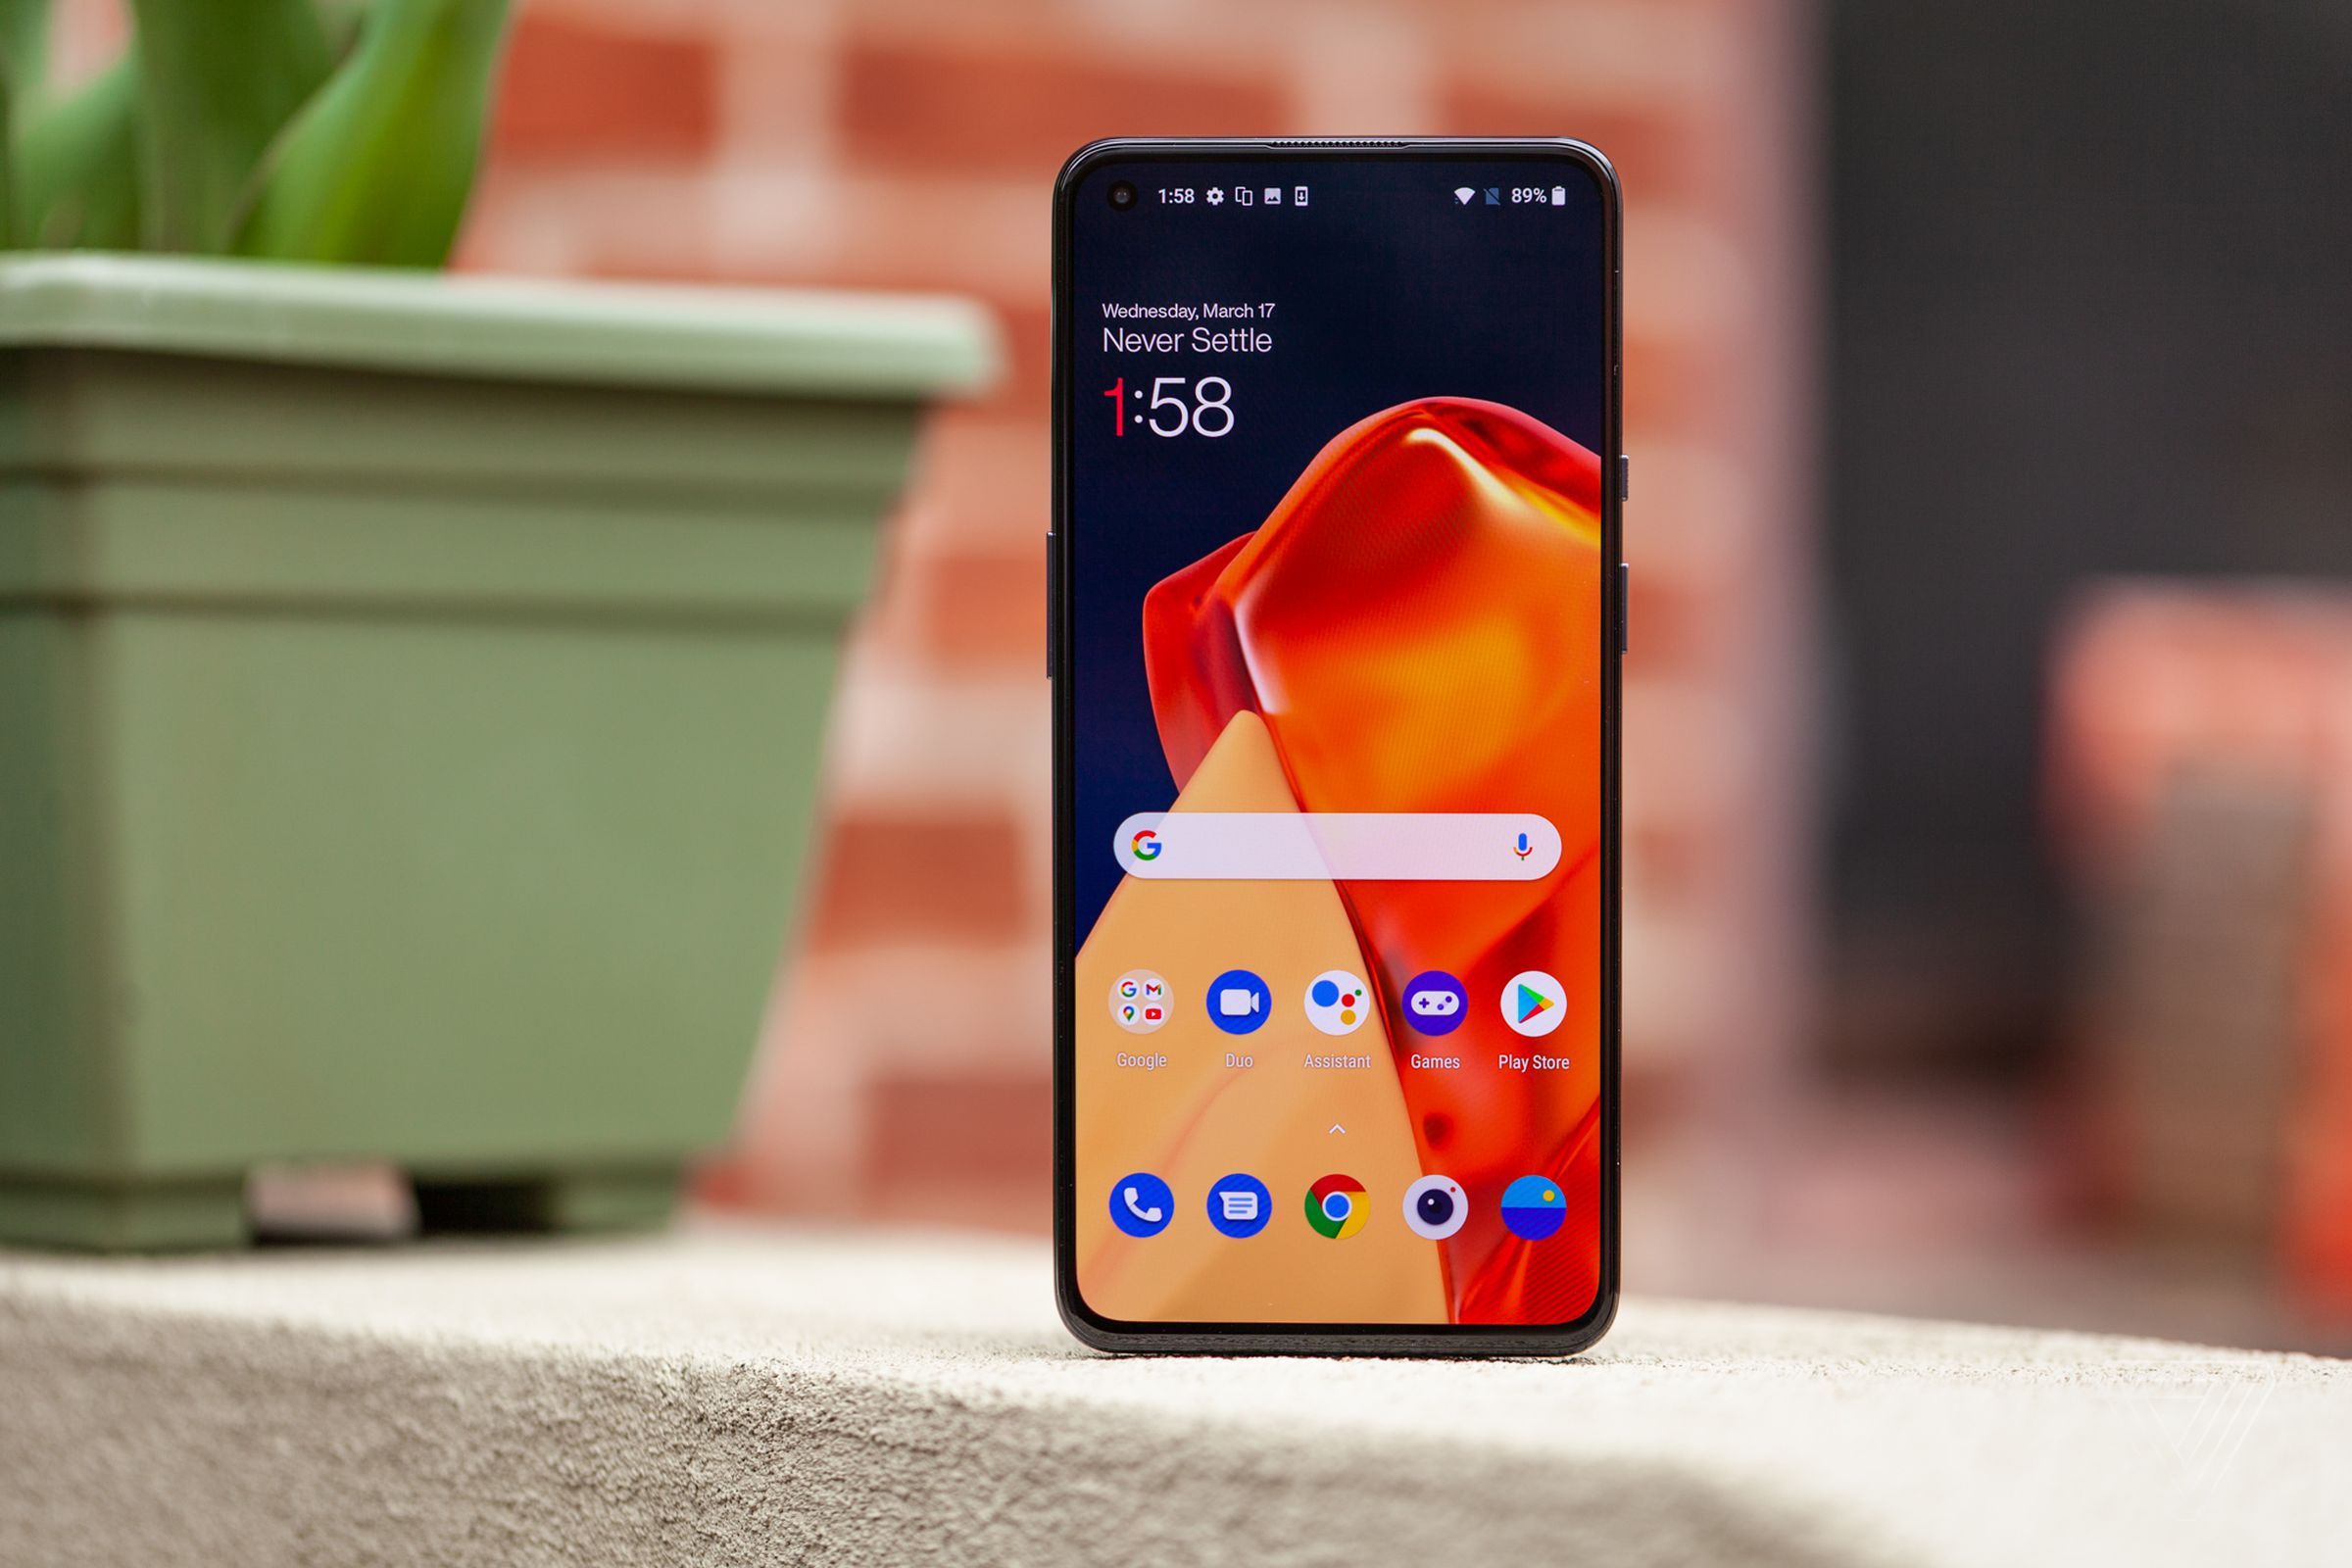 The OnePlus 9 misses some of the high-end features on the more expensive Pro model, but it’s a better overall buy for most people.